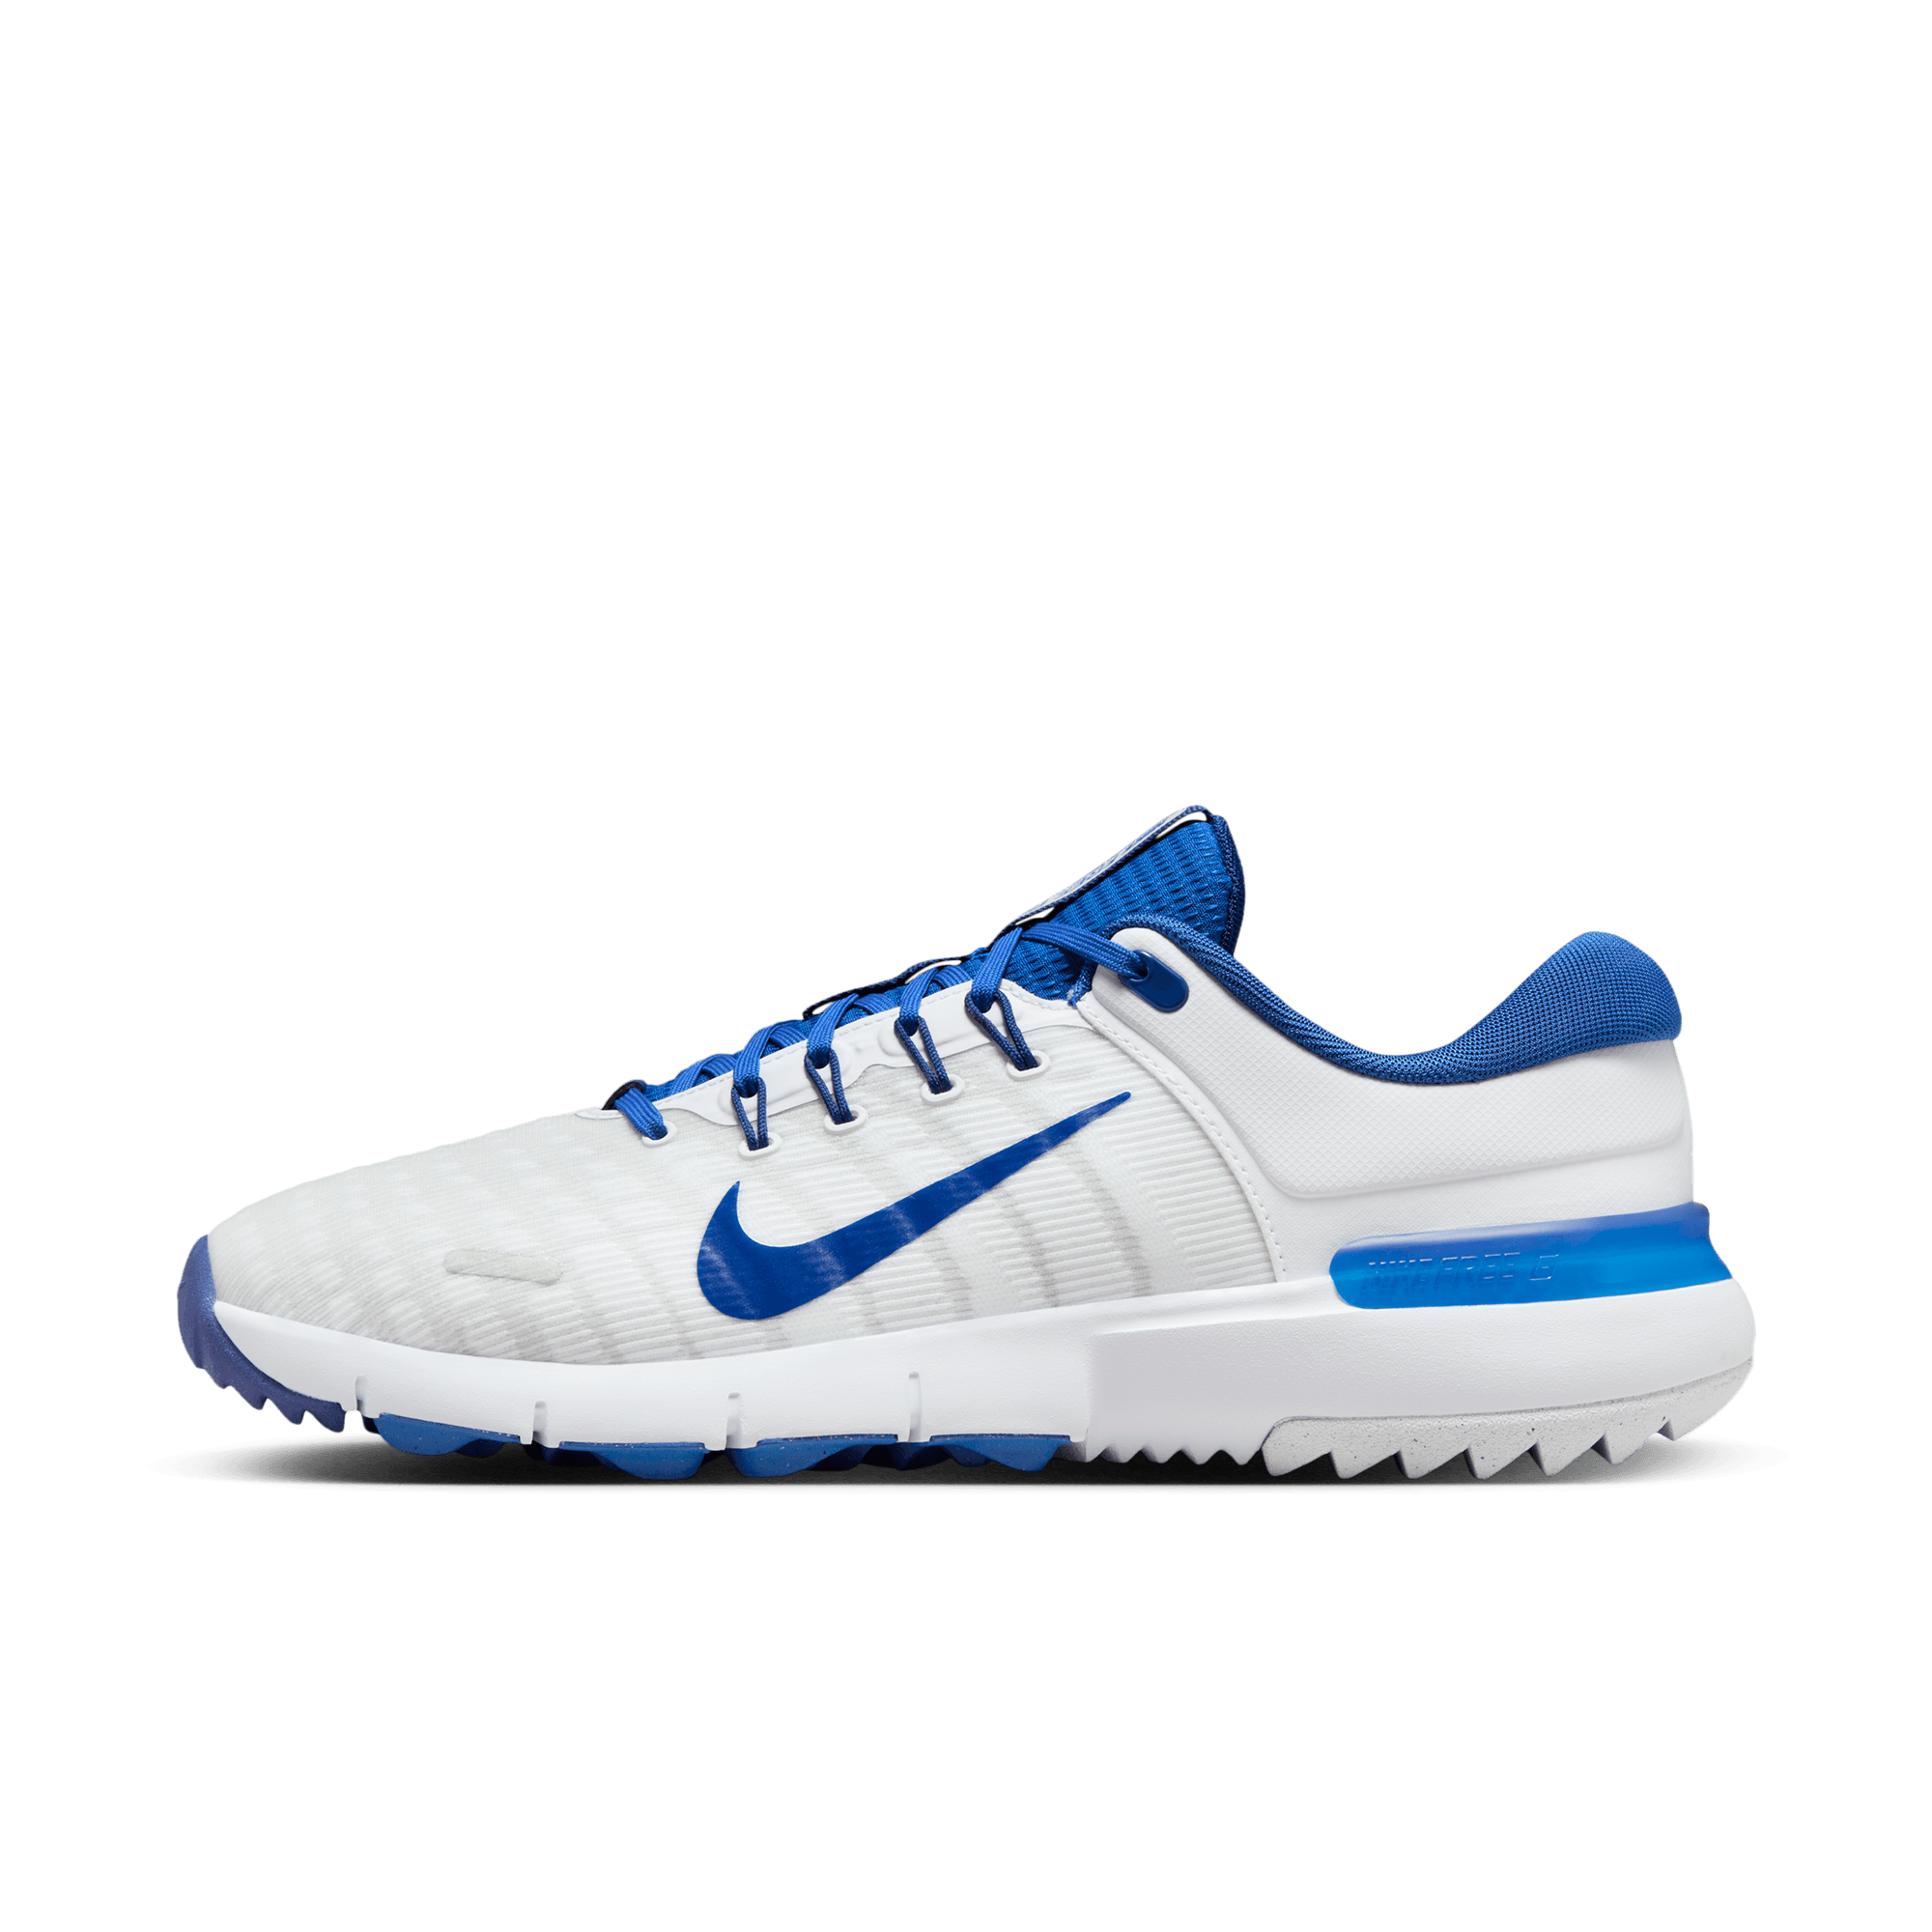 NIKE FREE GOLF MEN'S GOLF SHOES (WIDE)